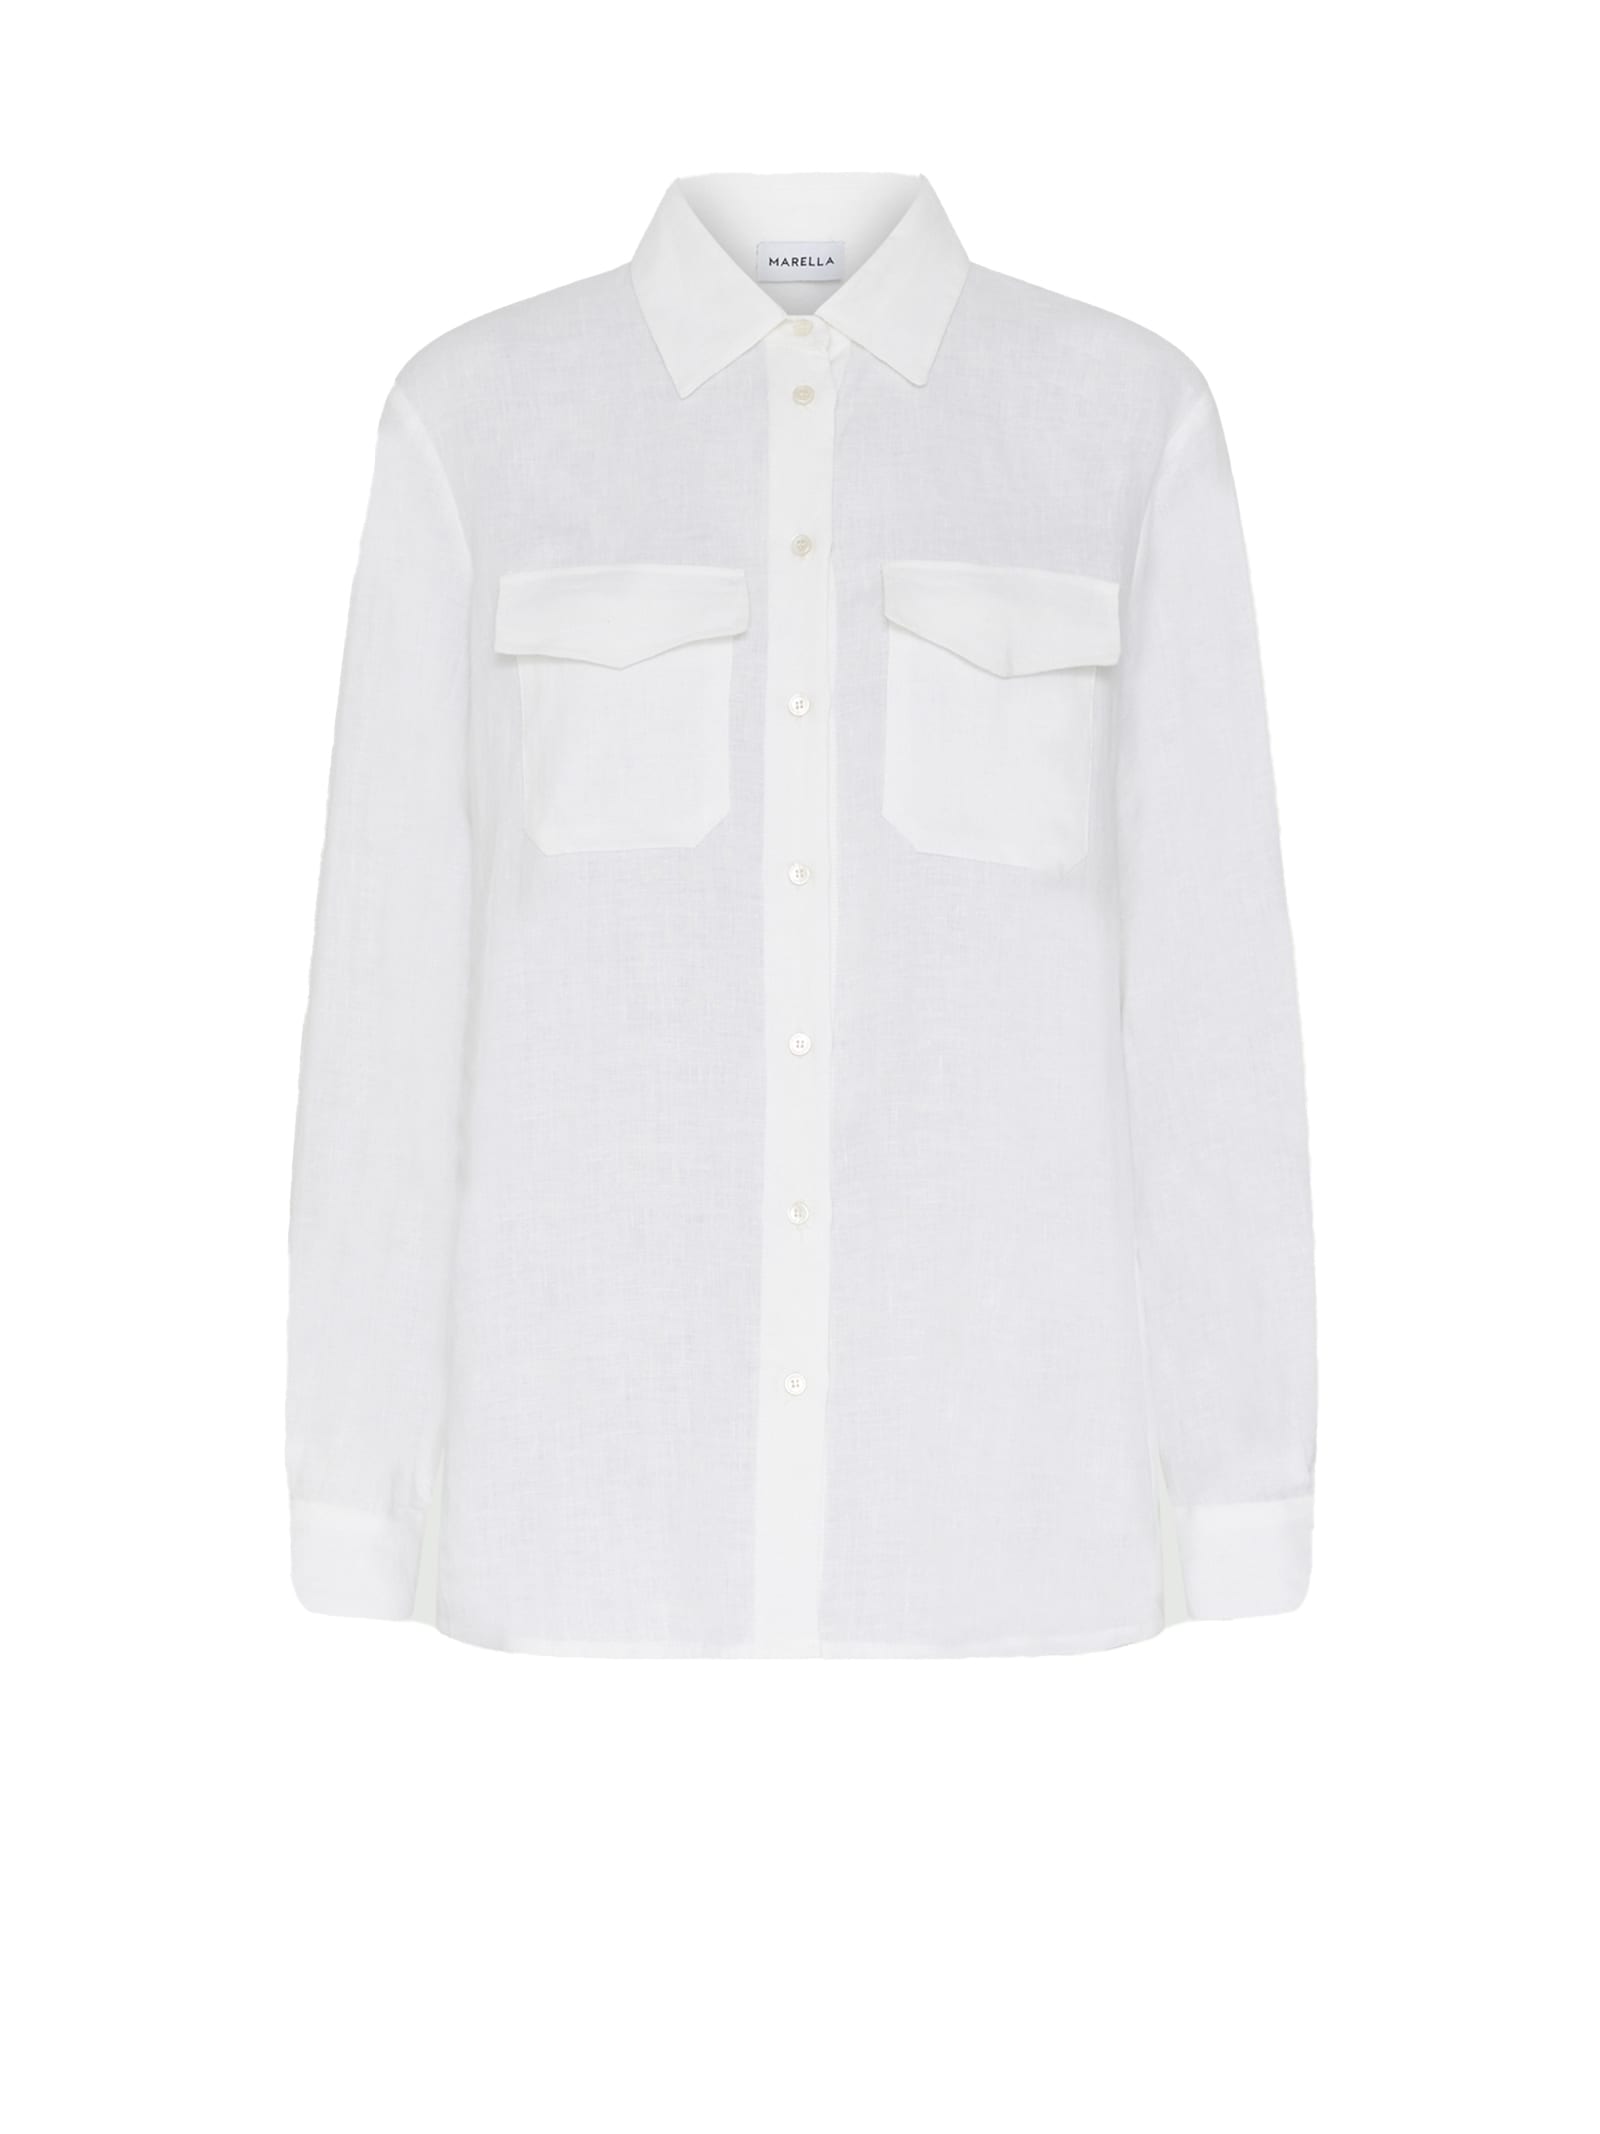 White Long-sleeved Shirt With Pockets